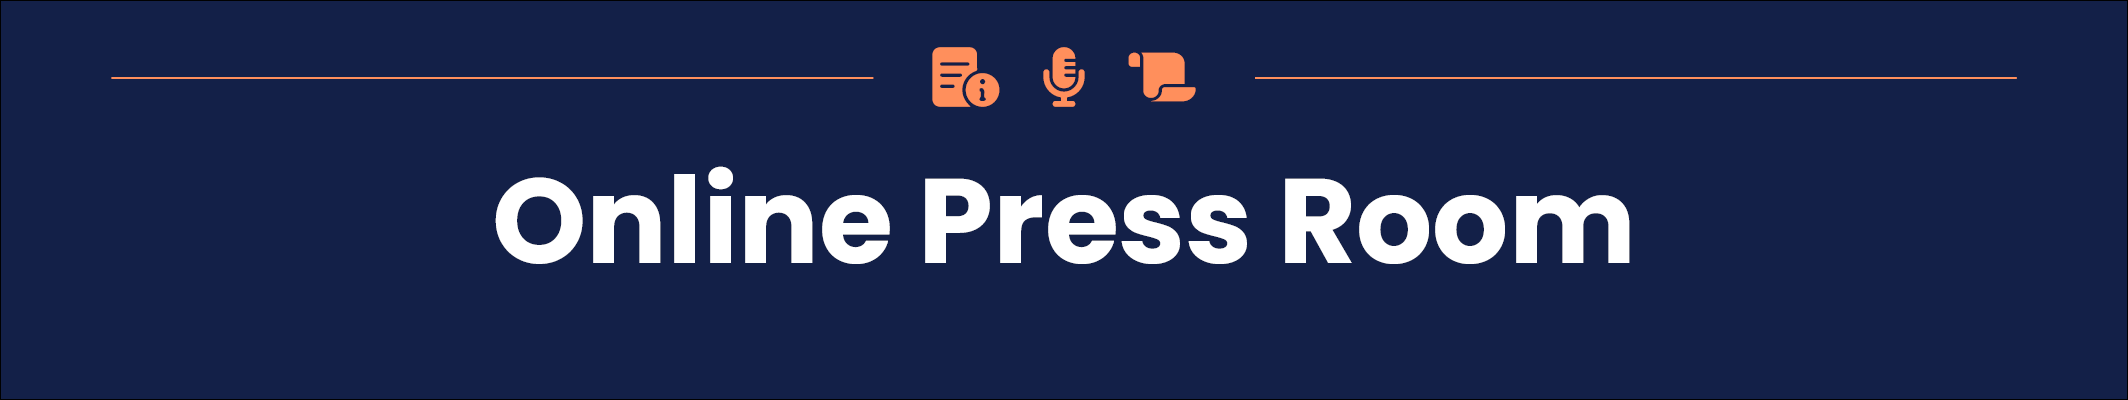 Online press room in white letters on a dark blue background